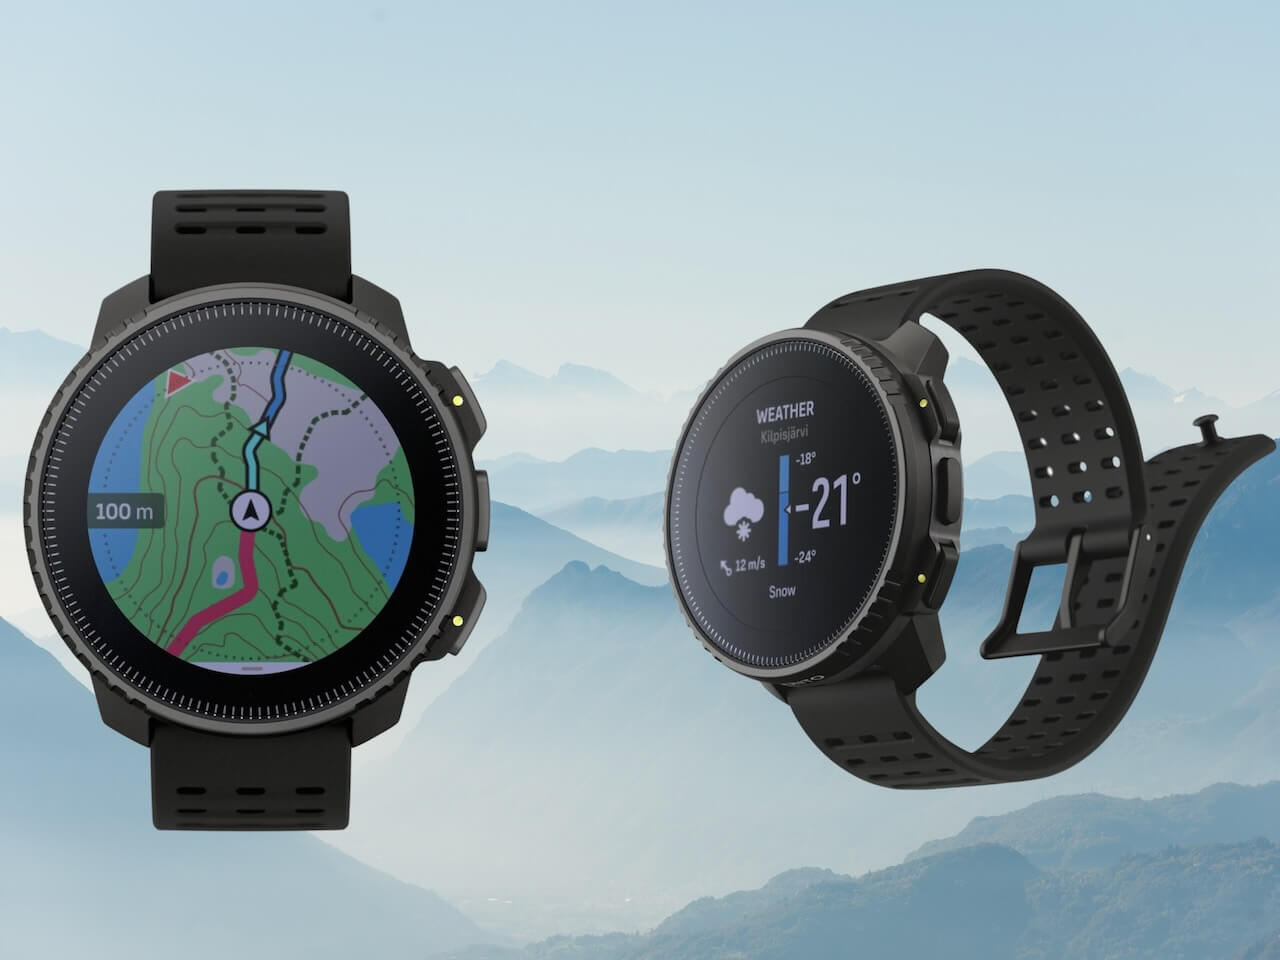 Featured image for “Nyhet: Suunto Vertical”